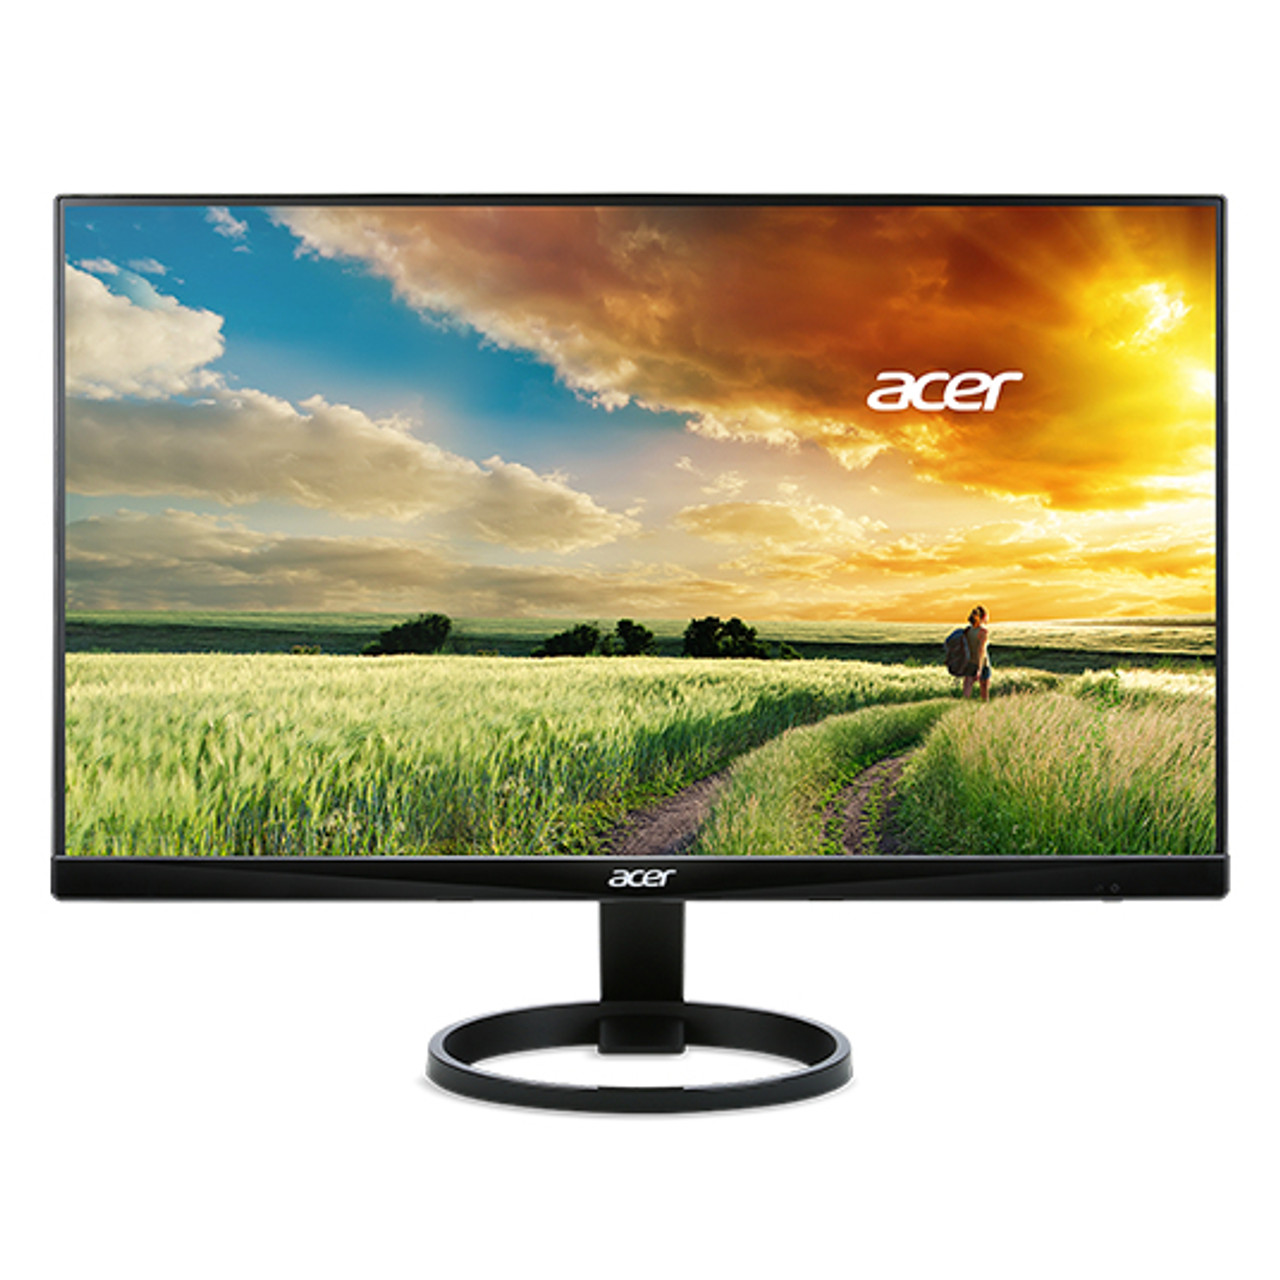 Acer R240HY bmiuzx 23.8" Full HD IPS Black Flat computer monitor